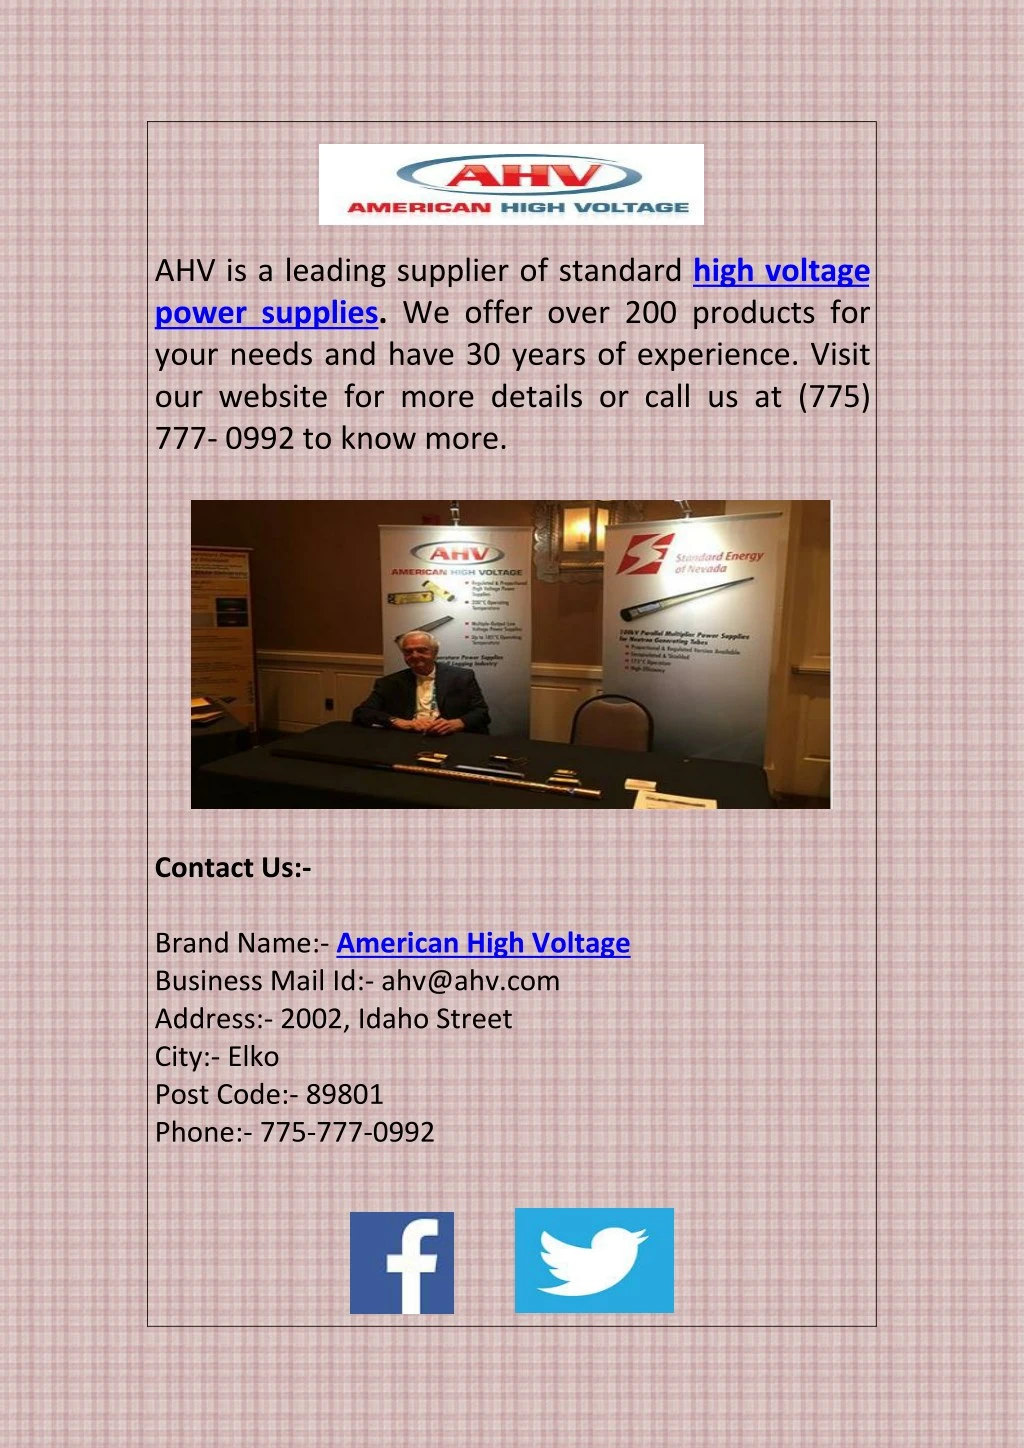 ahv is a leading supplier of standard high